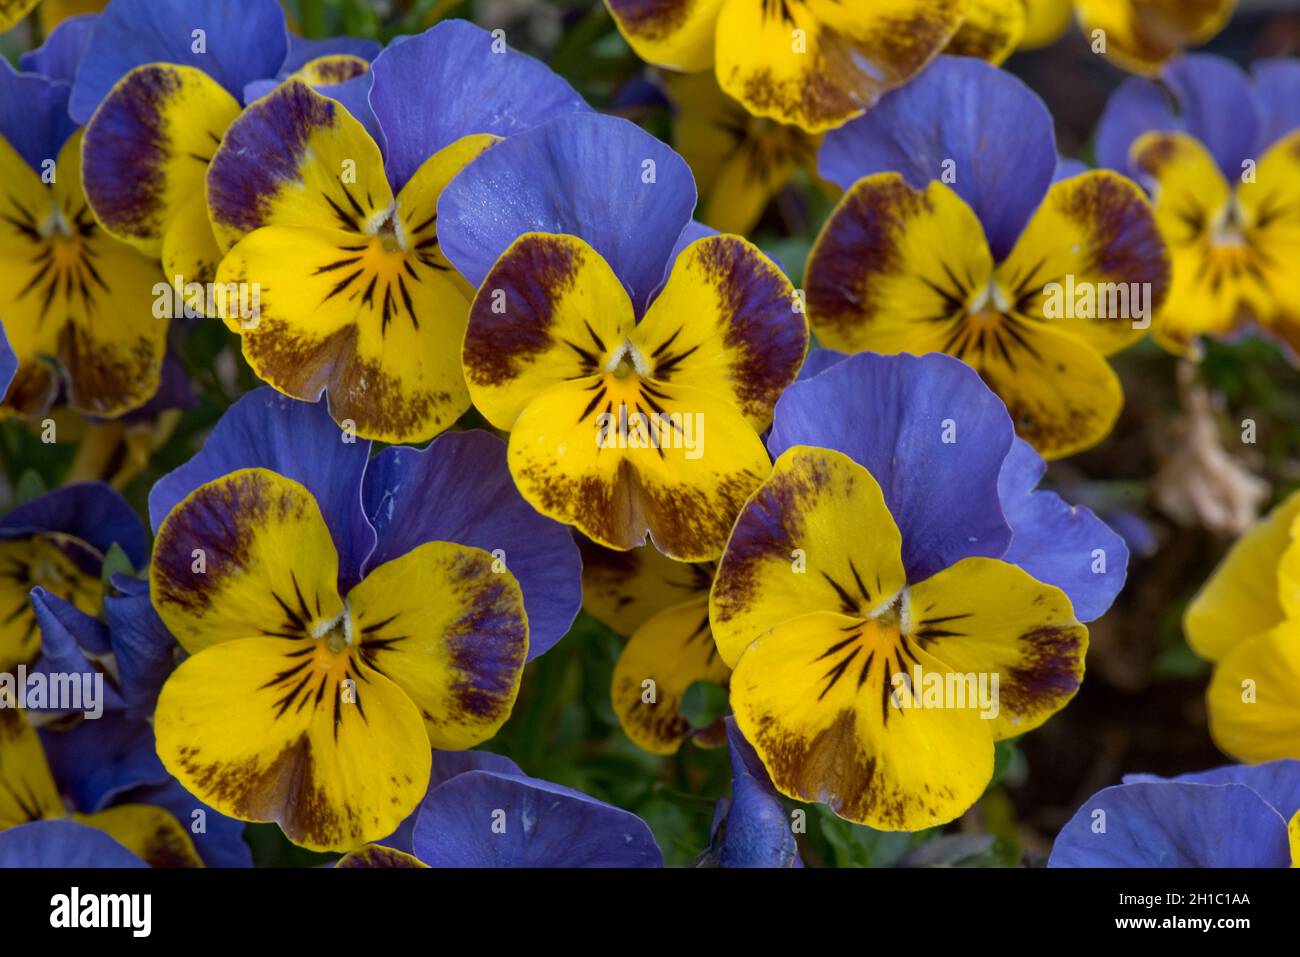 Flowers of a variety of pansy (Viola spp.) with attractive blue and yellow flowers with purple markings, March Stock Photo